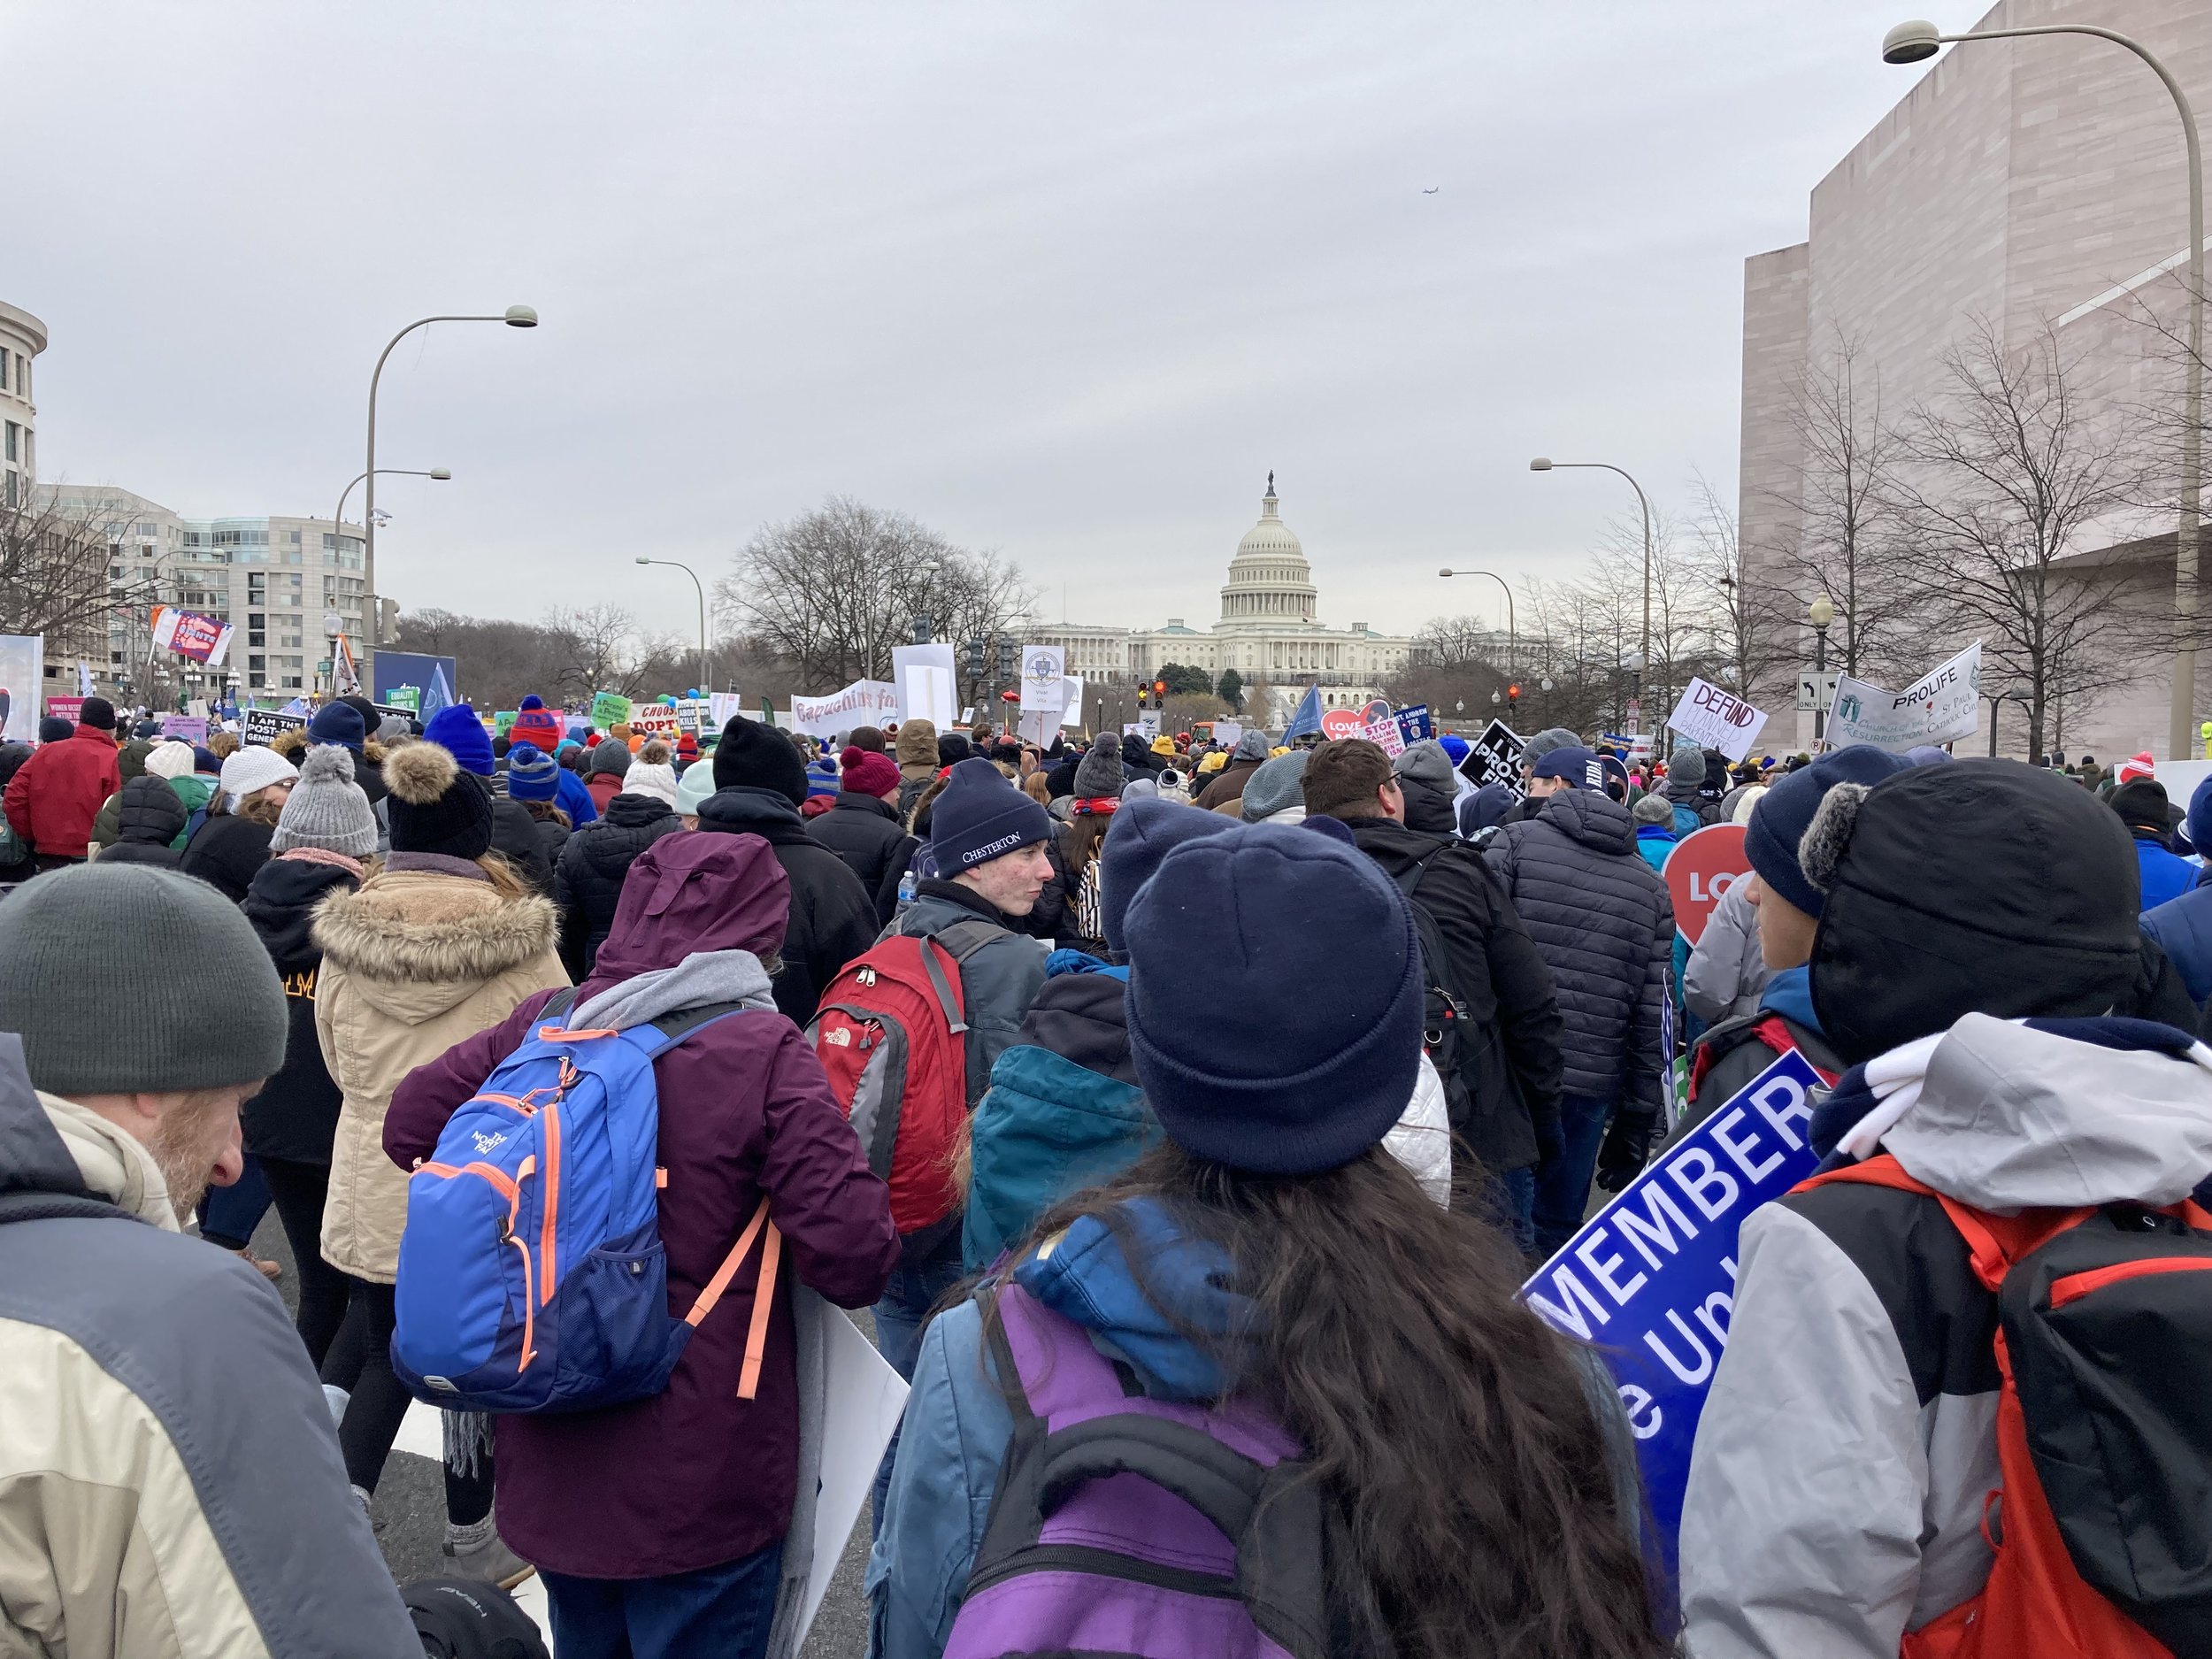 The National March for Life